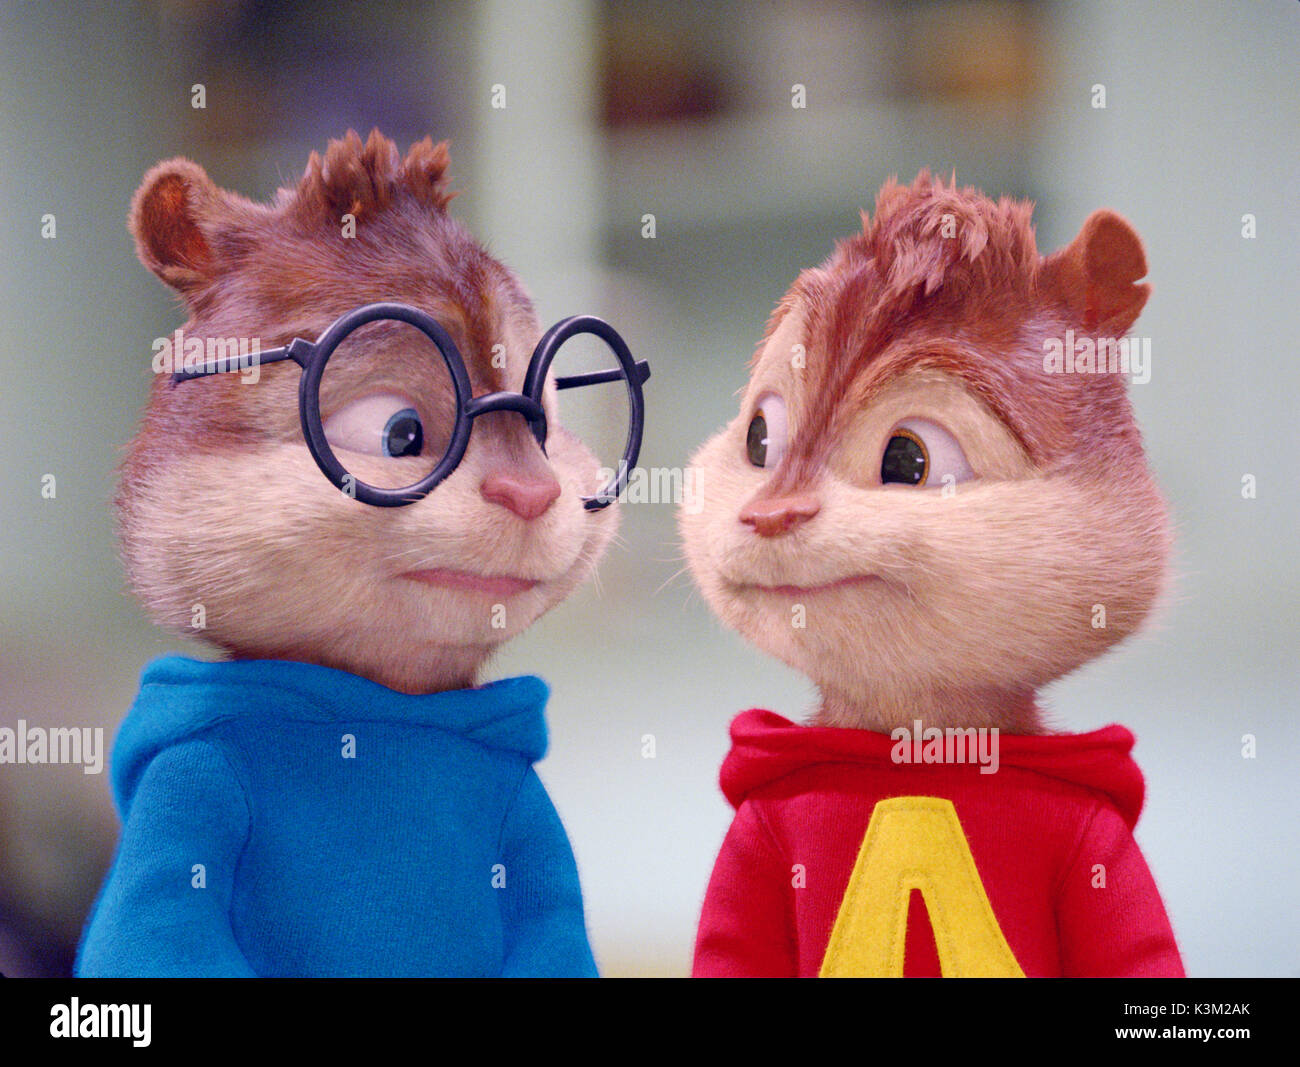 ALVIN AND THE CHIPMUNKS: THE SQUEAKUEL aka ALVIN AND THE CHIPMUNKS 2 MATTHEW GRAY GUBLER voices Simon, JUSTIN LONG voices Alvin       Date: 2009 Stock Photo